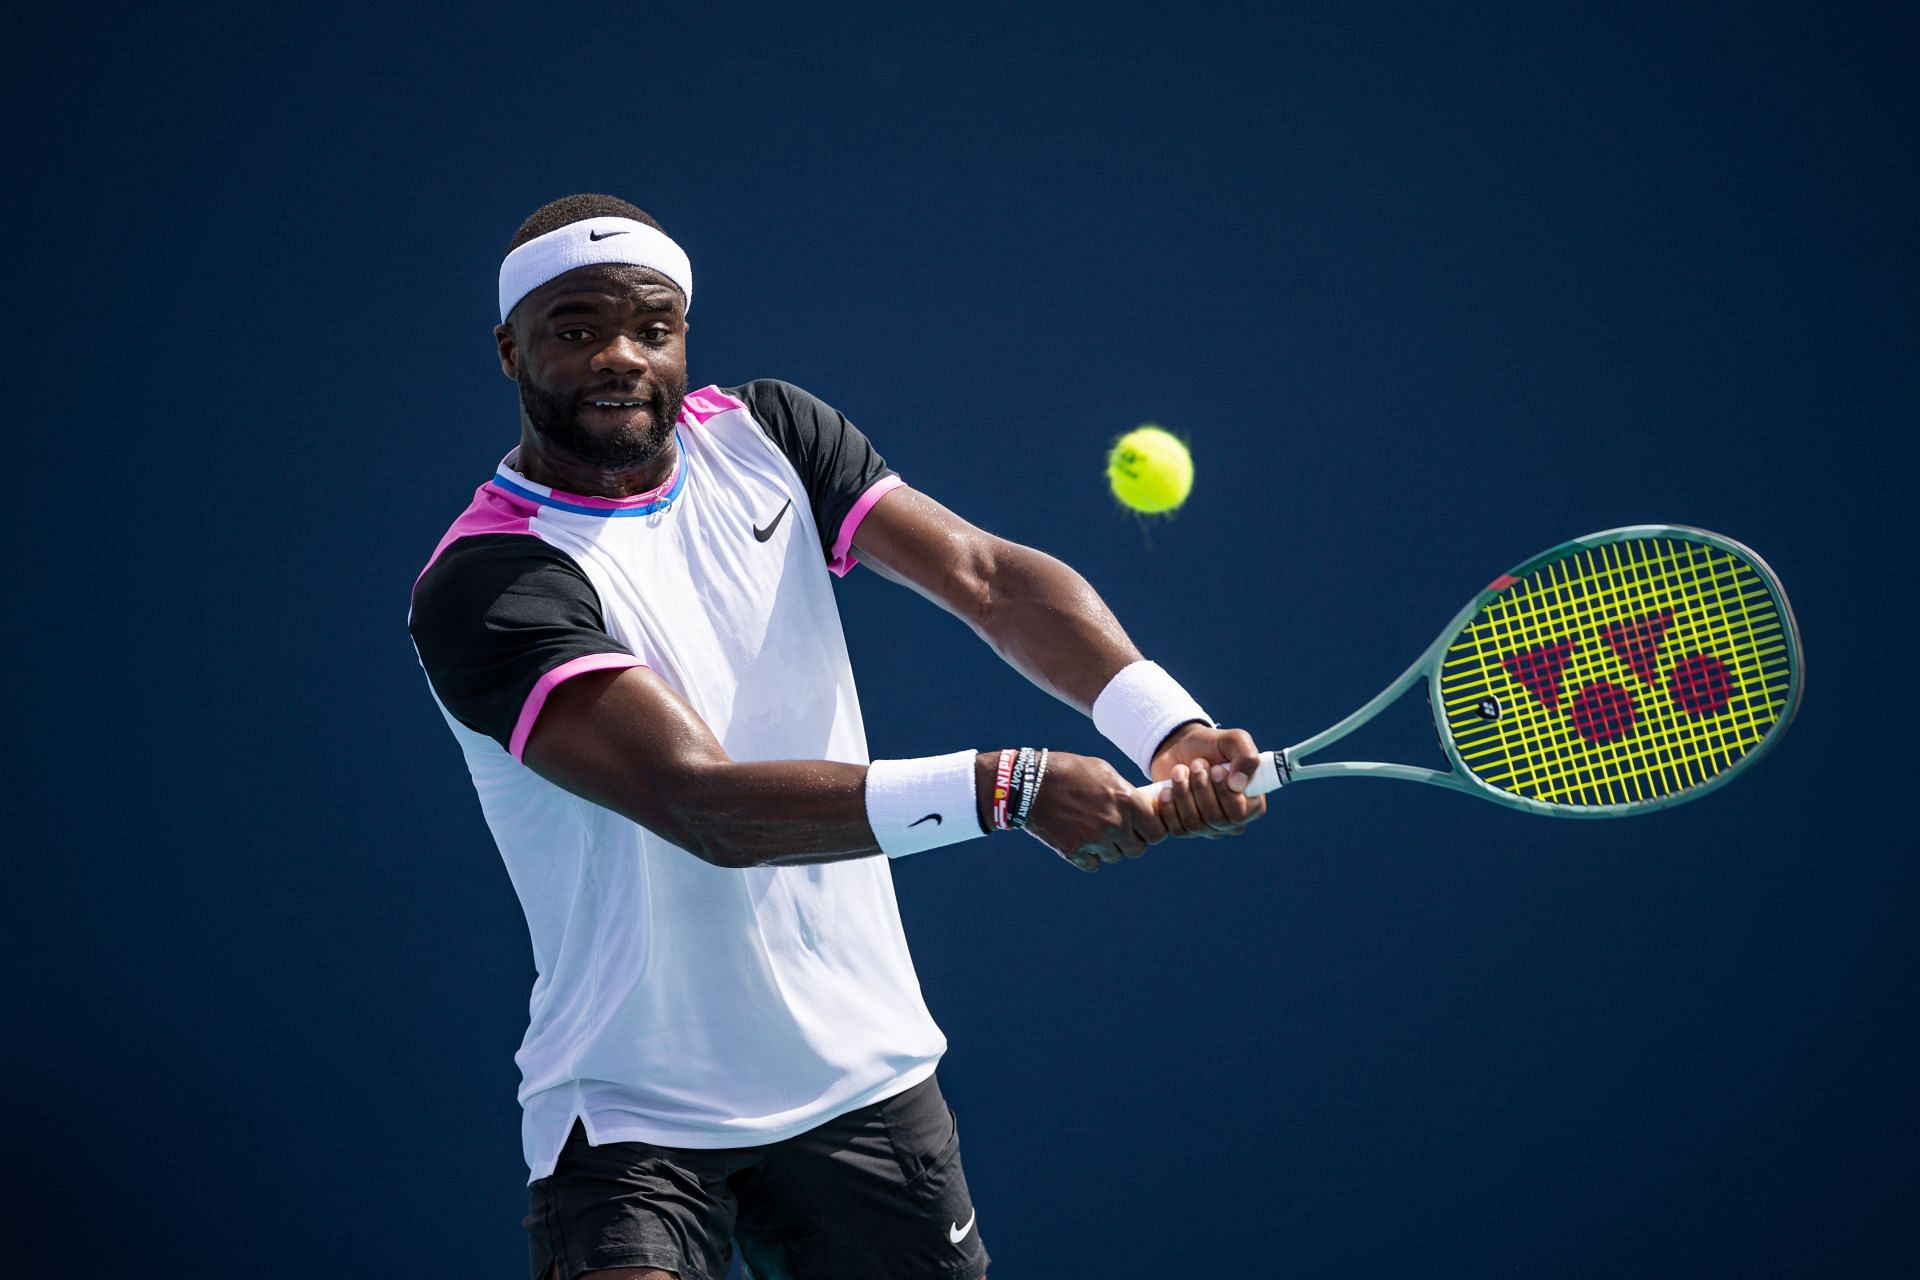 Tiafoe in action at the Miami Open